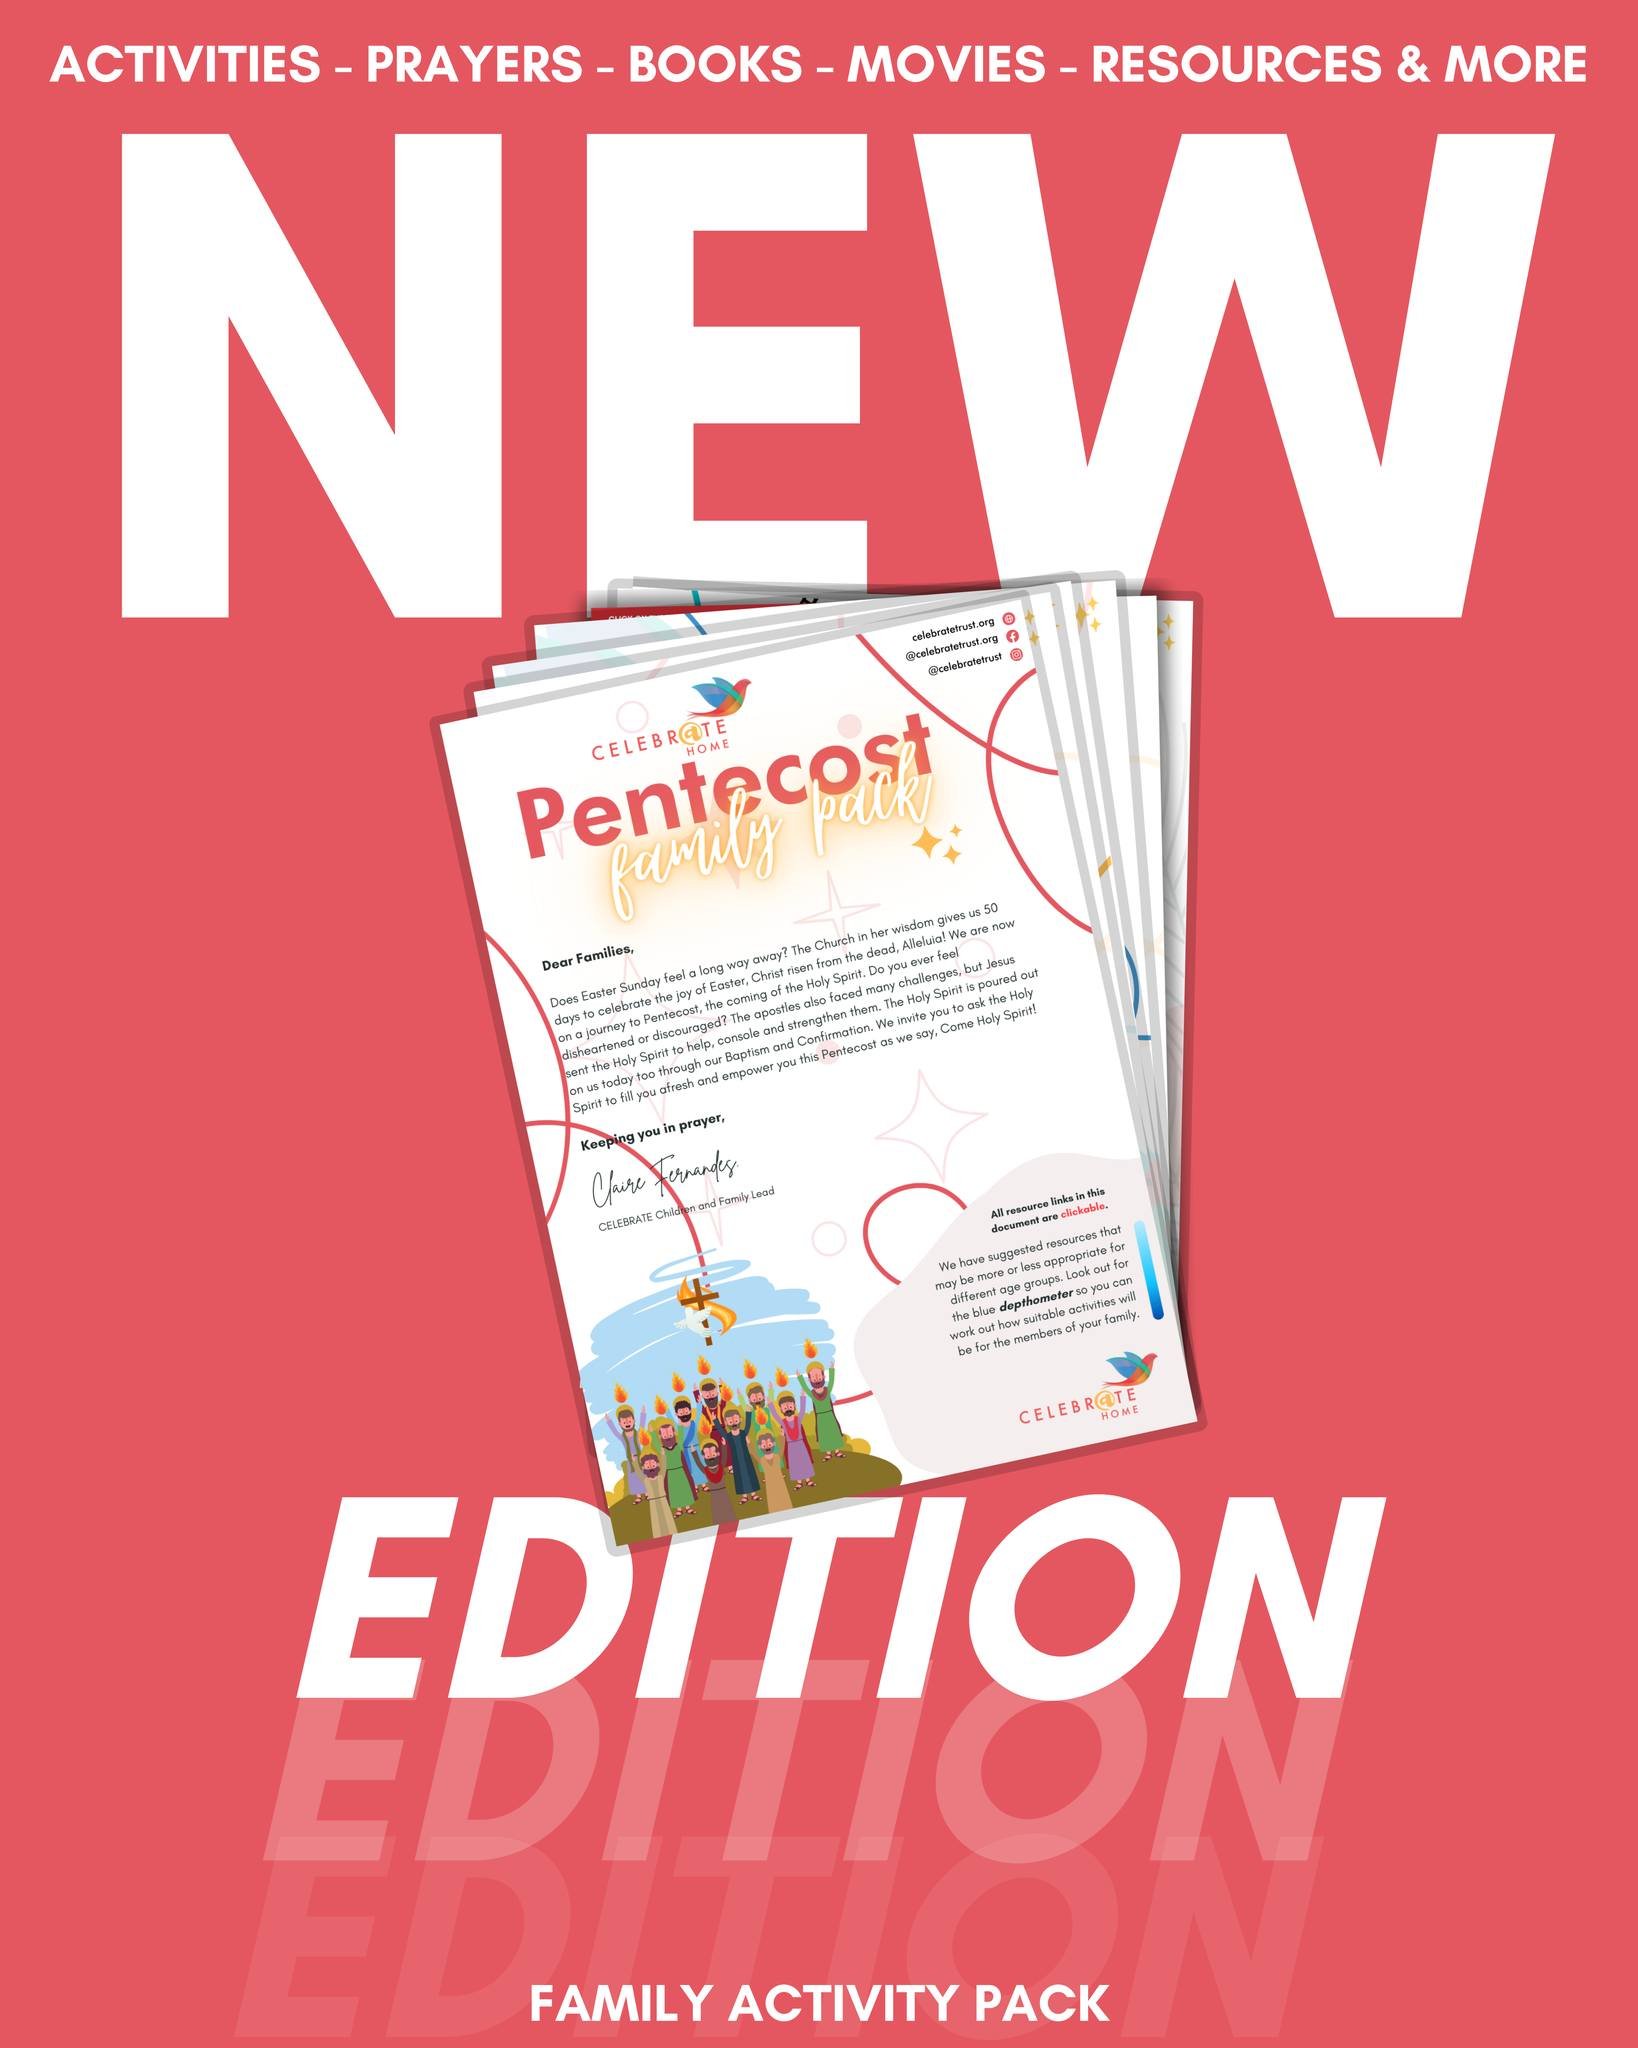 We're delighted to launch the latest edition of our Family Activity Pack on Pentecost 🔥

This pack is full of ideas to help prepare your hearts and minds for the descent of the Holy Spirit!

Download yours at www.celebratetrust.org/onlinefamilyactiv